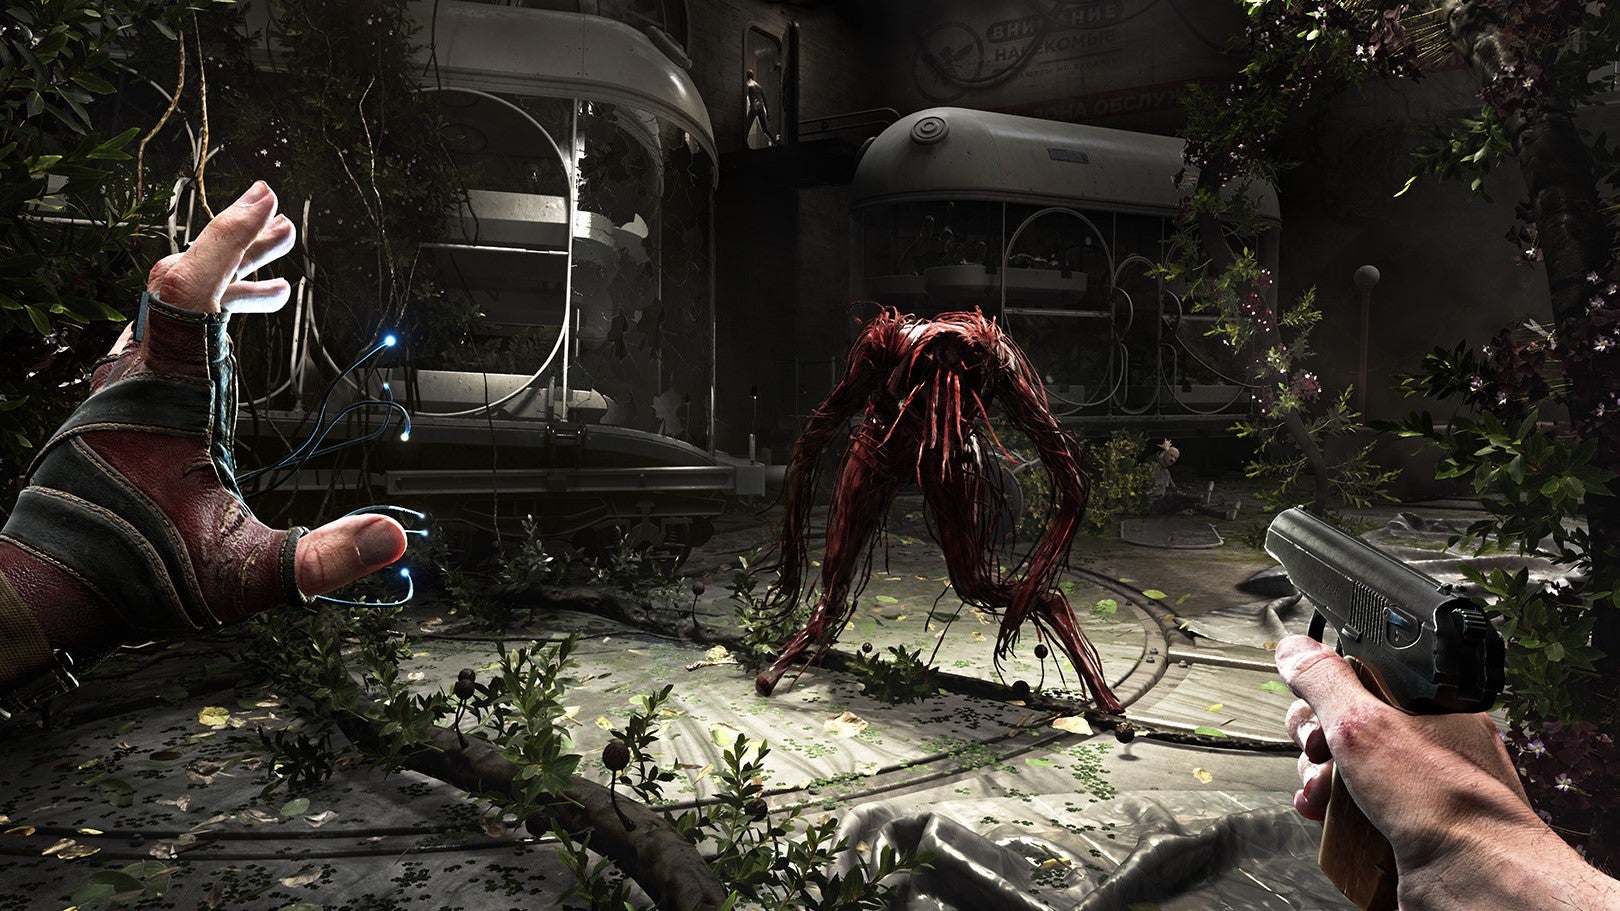 The player character uses his wiry glove powers against a plantlike enemy in Atomic Heart.